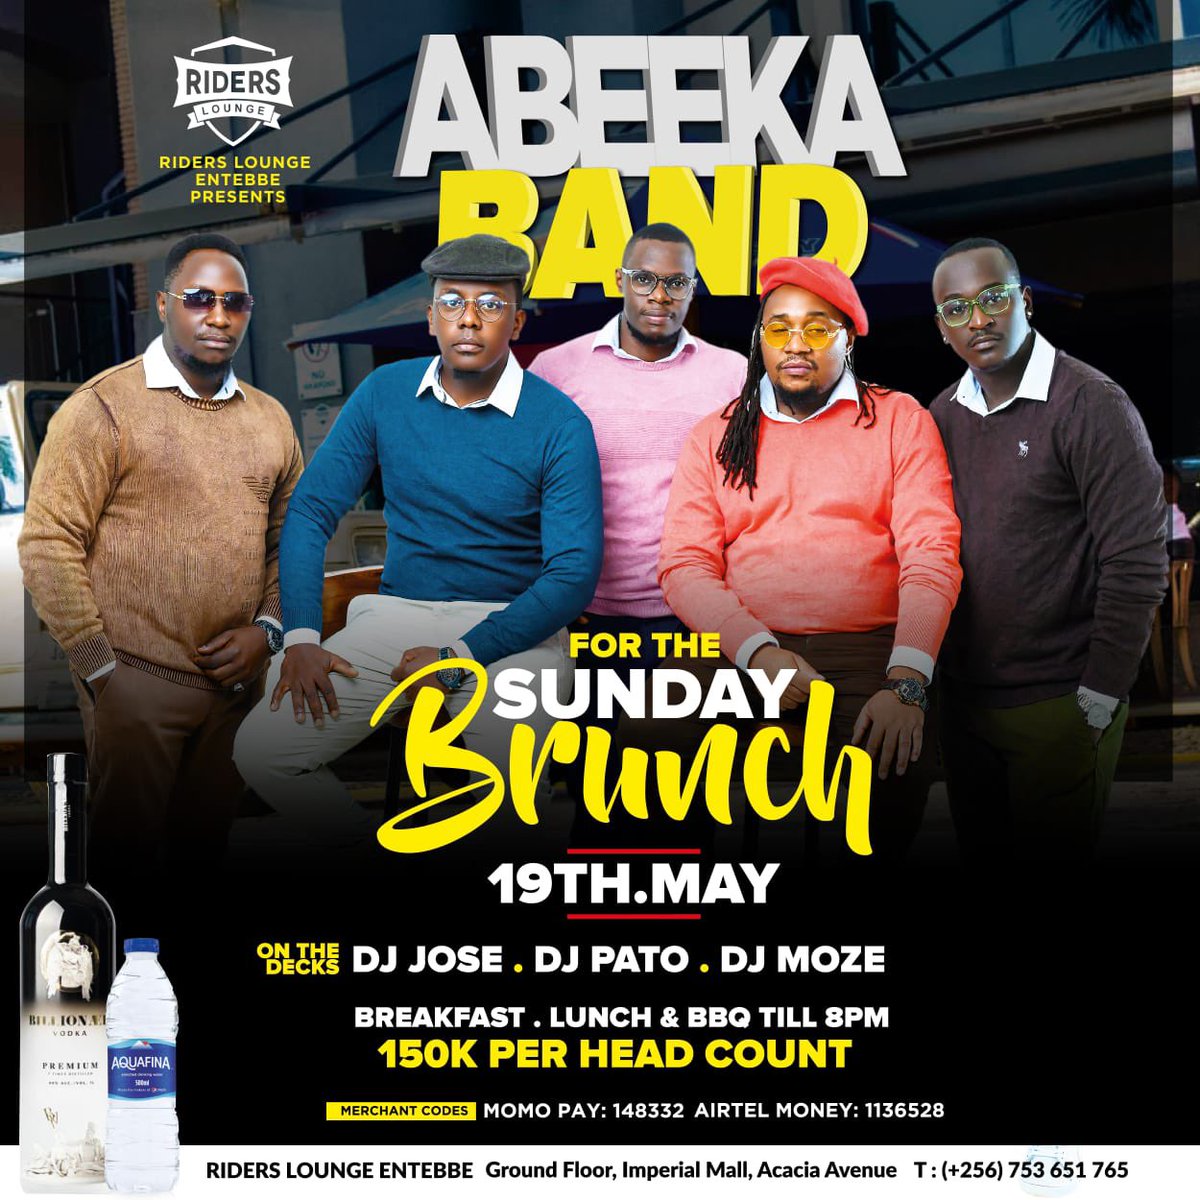 We return to Riders Lounge Entebbe for the Sunday brunch tomorrow. Do not miss!